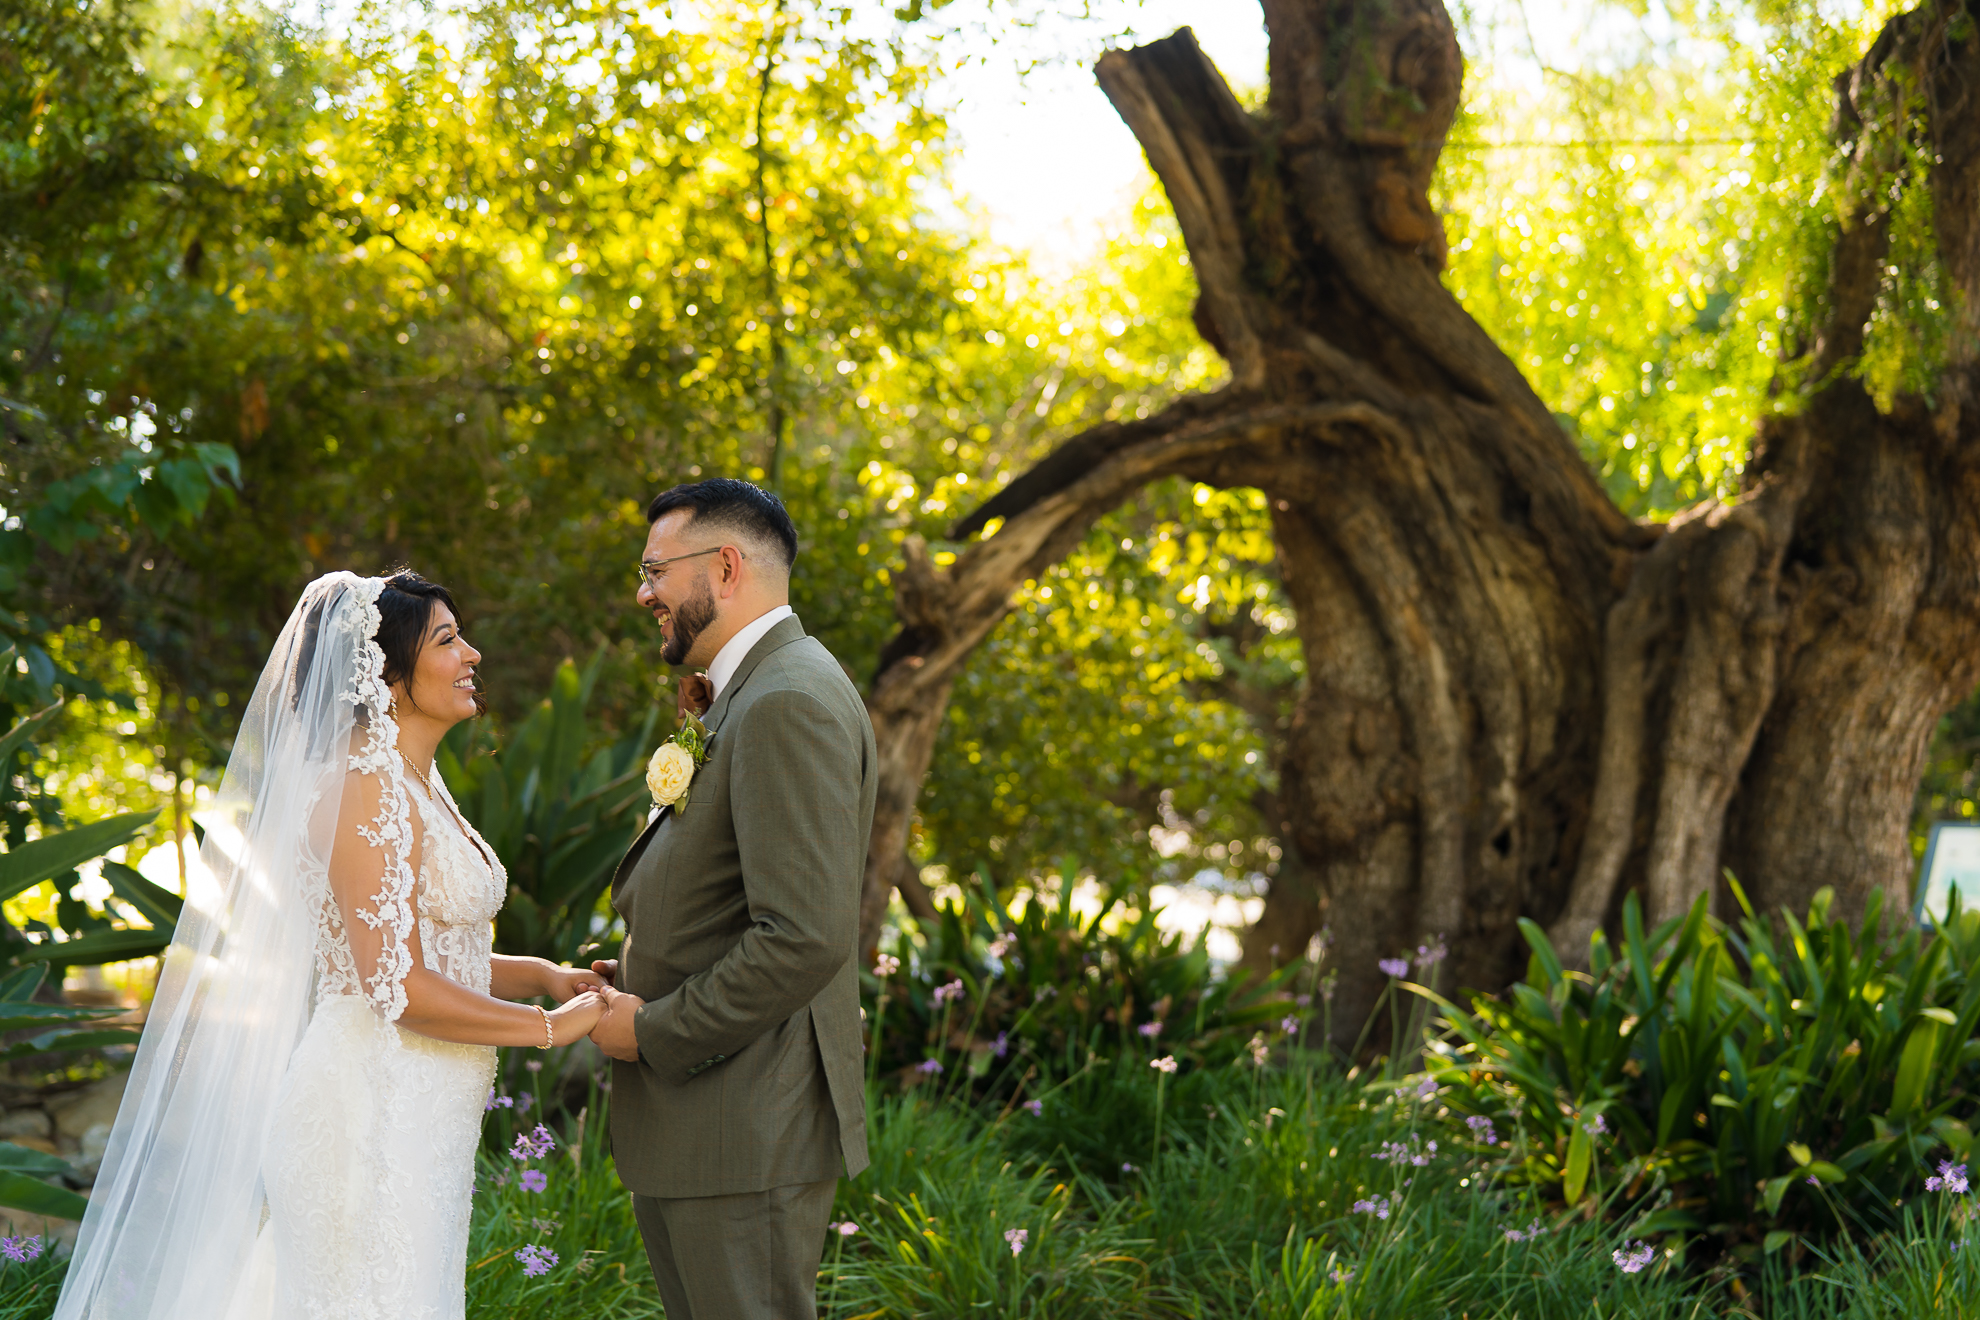 ThomasKim_photography A bride and groom standing in front of a tree, symbolizing their union as S & A.